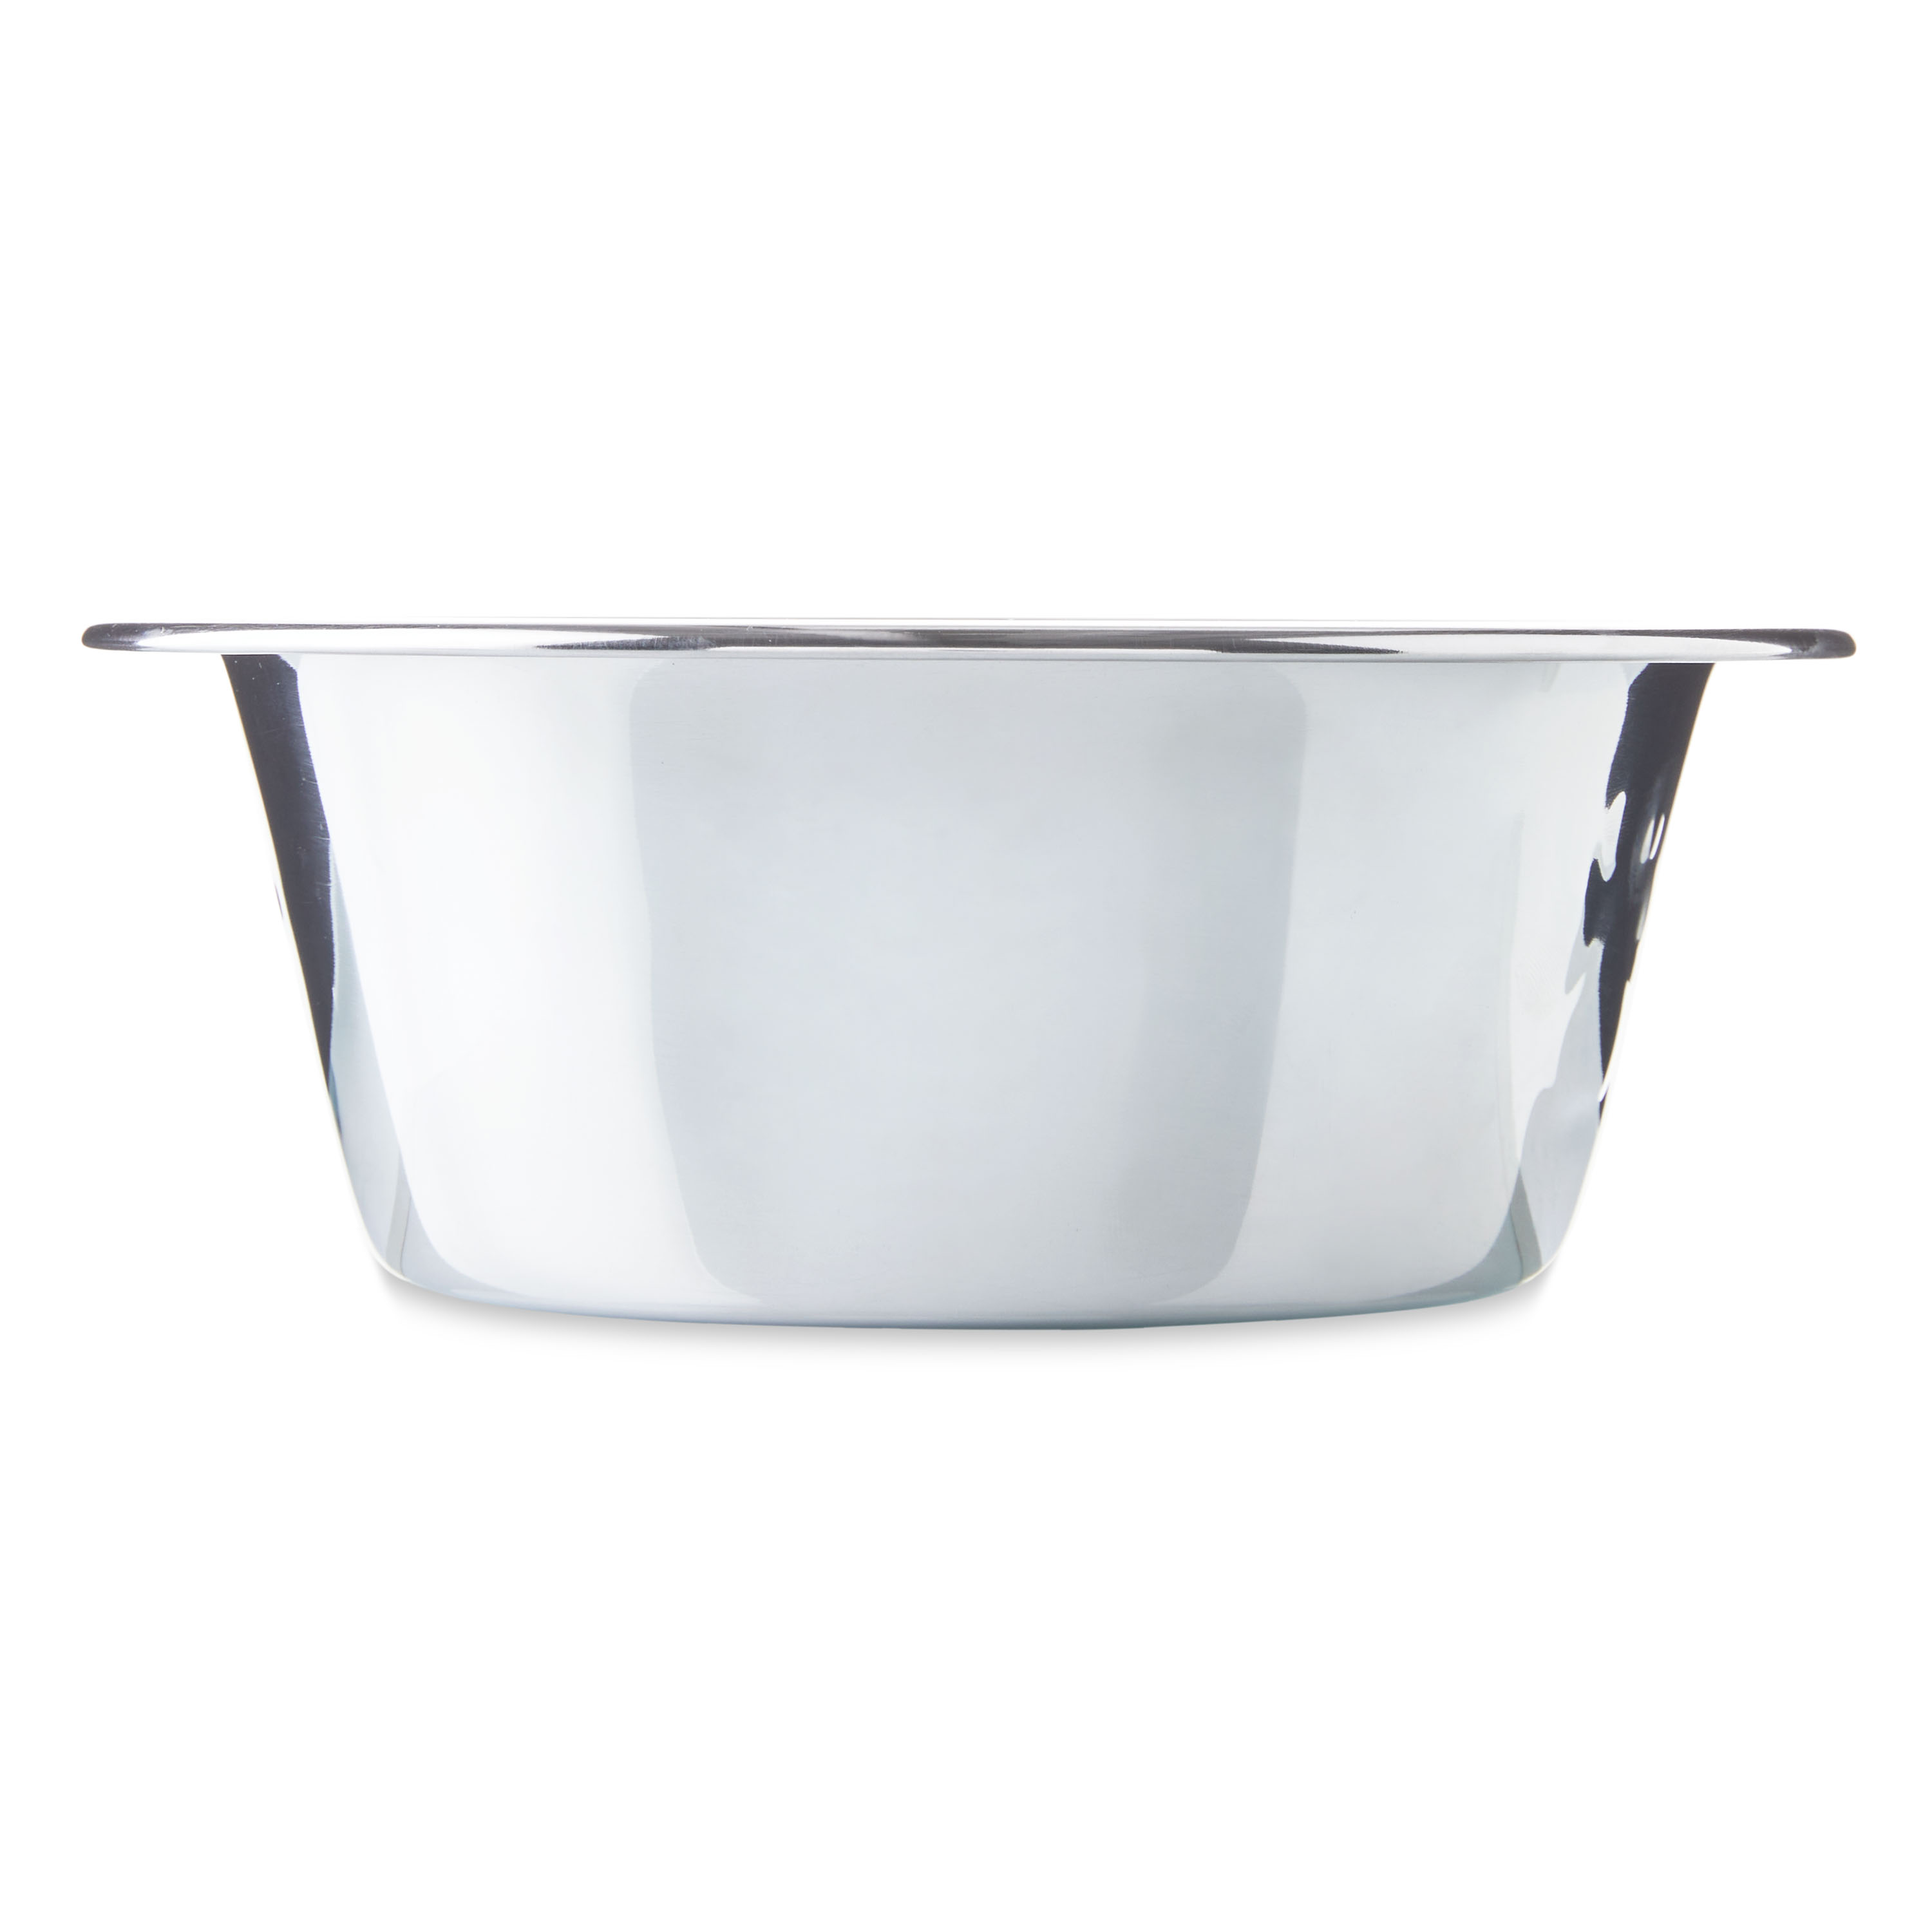 Vibrant Life Stainless Steel Dog Bowl, Large - image 3 of 5